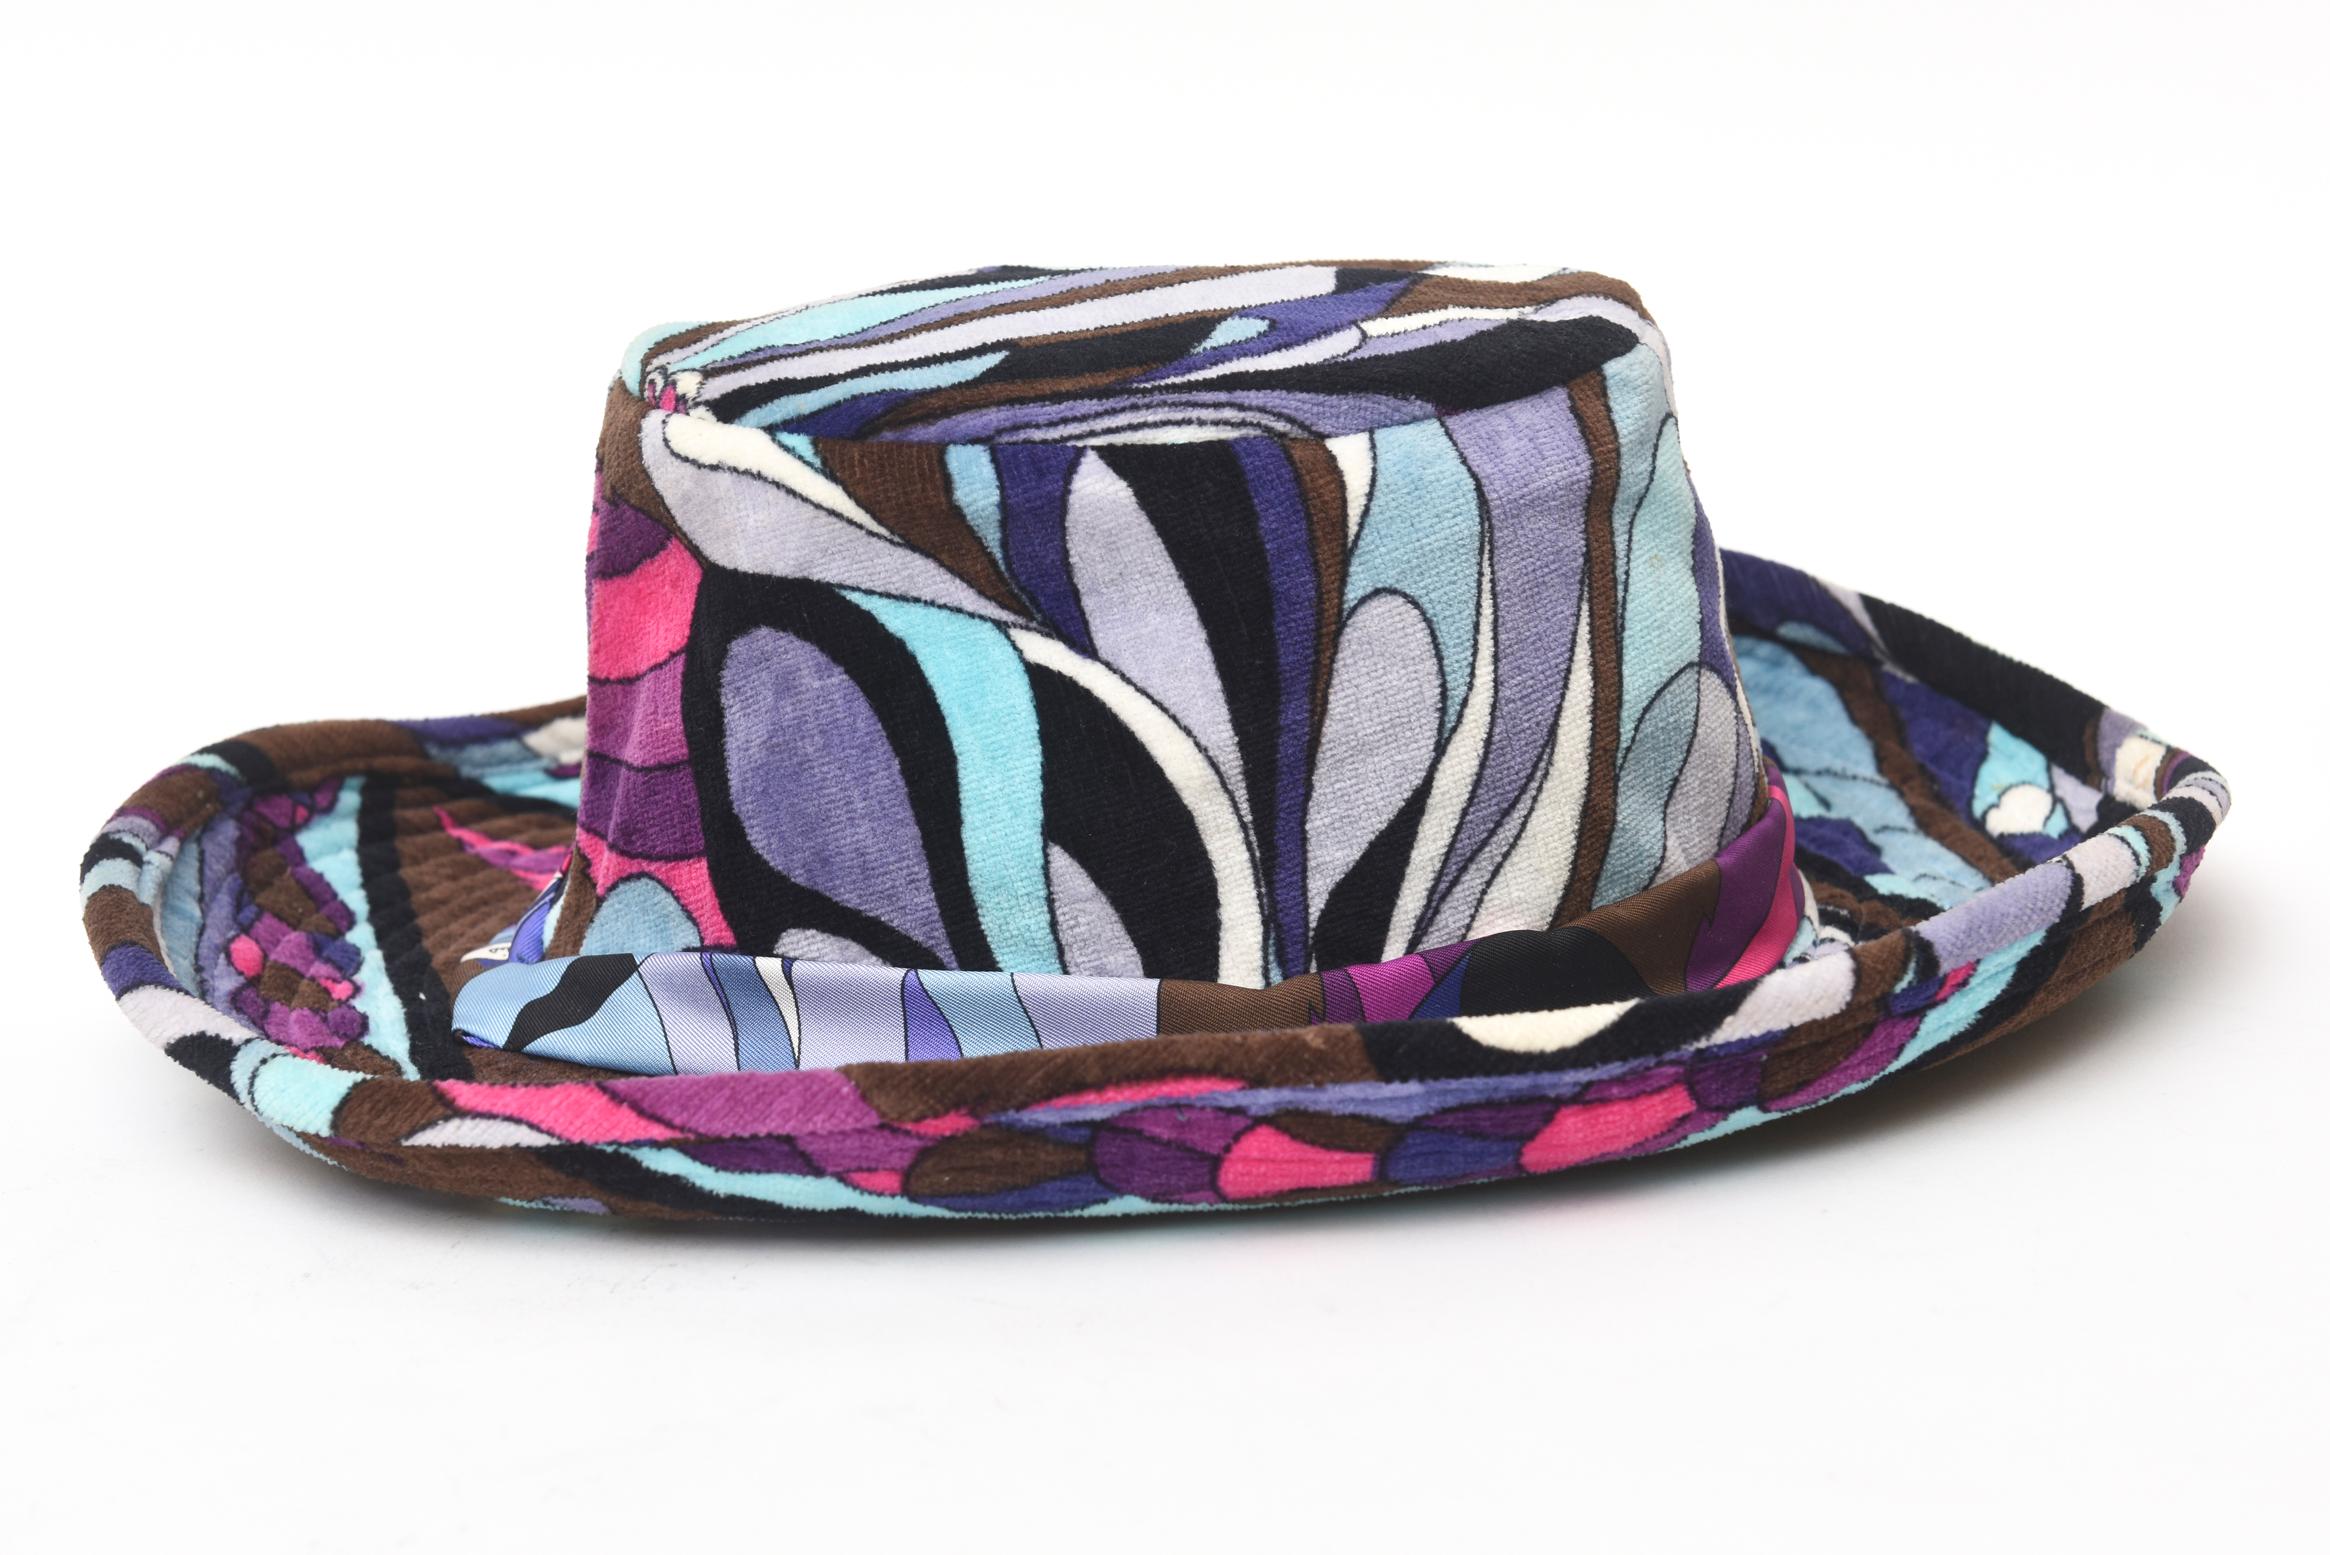 This fabulous vintage Emilio Pucci velvet hat is from the 60's. It has a cowboy style wide brim high center. It is a size small and will fit a very small head. The swirling colors are luscious of hues of brown, black shades of purple and shades of